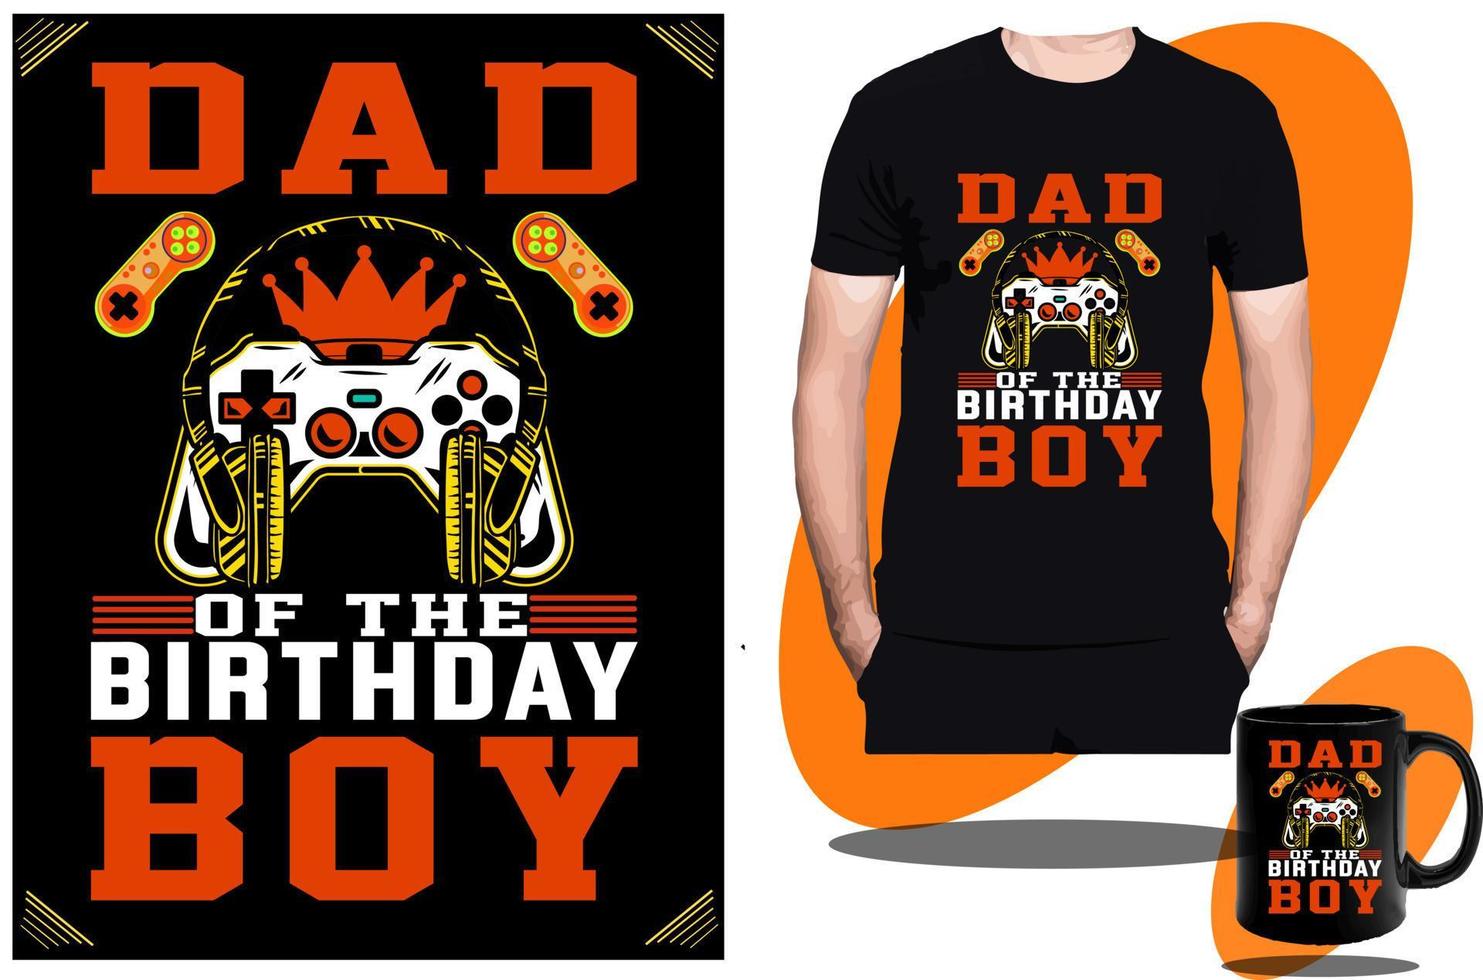 Fathers Day t shirt design and Granpa Funny Gaming t shirt design or vector